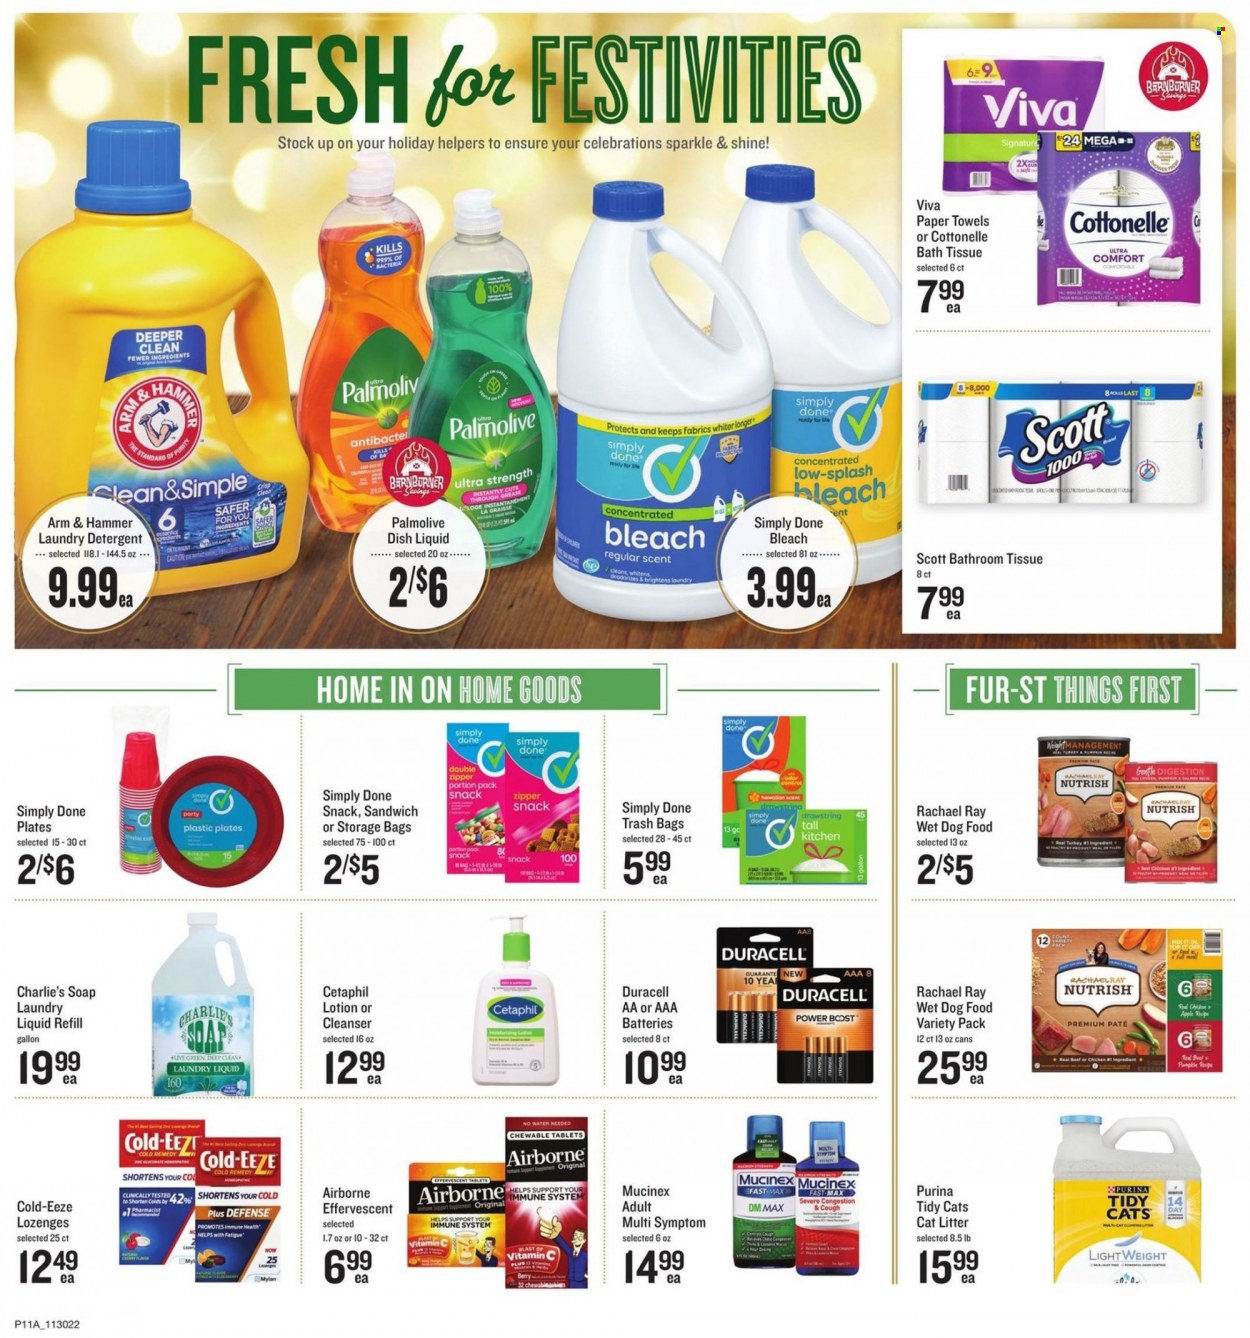 thumbnail - Lowes Foods Flyer - 11/30/2022 - 12/06/2022 - Sales products - sandwich, snack, Celebration, ARM & HAMMER, Boost, Purity, bath tissue, Cottonelle, Scott, kitchen towels, paper towels, detergent, bleach, laundry detergent, dishwashing liquid, Palmolive, soap, cleanser, body lotion, bag, trash bags, battery, Duracell, AAA batteries, animal food, cat litter, dog food, wet dog food, Purina, Nutrish, Mucinex, vitamin c, Cold-EEZE. Page 11.